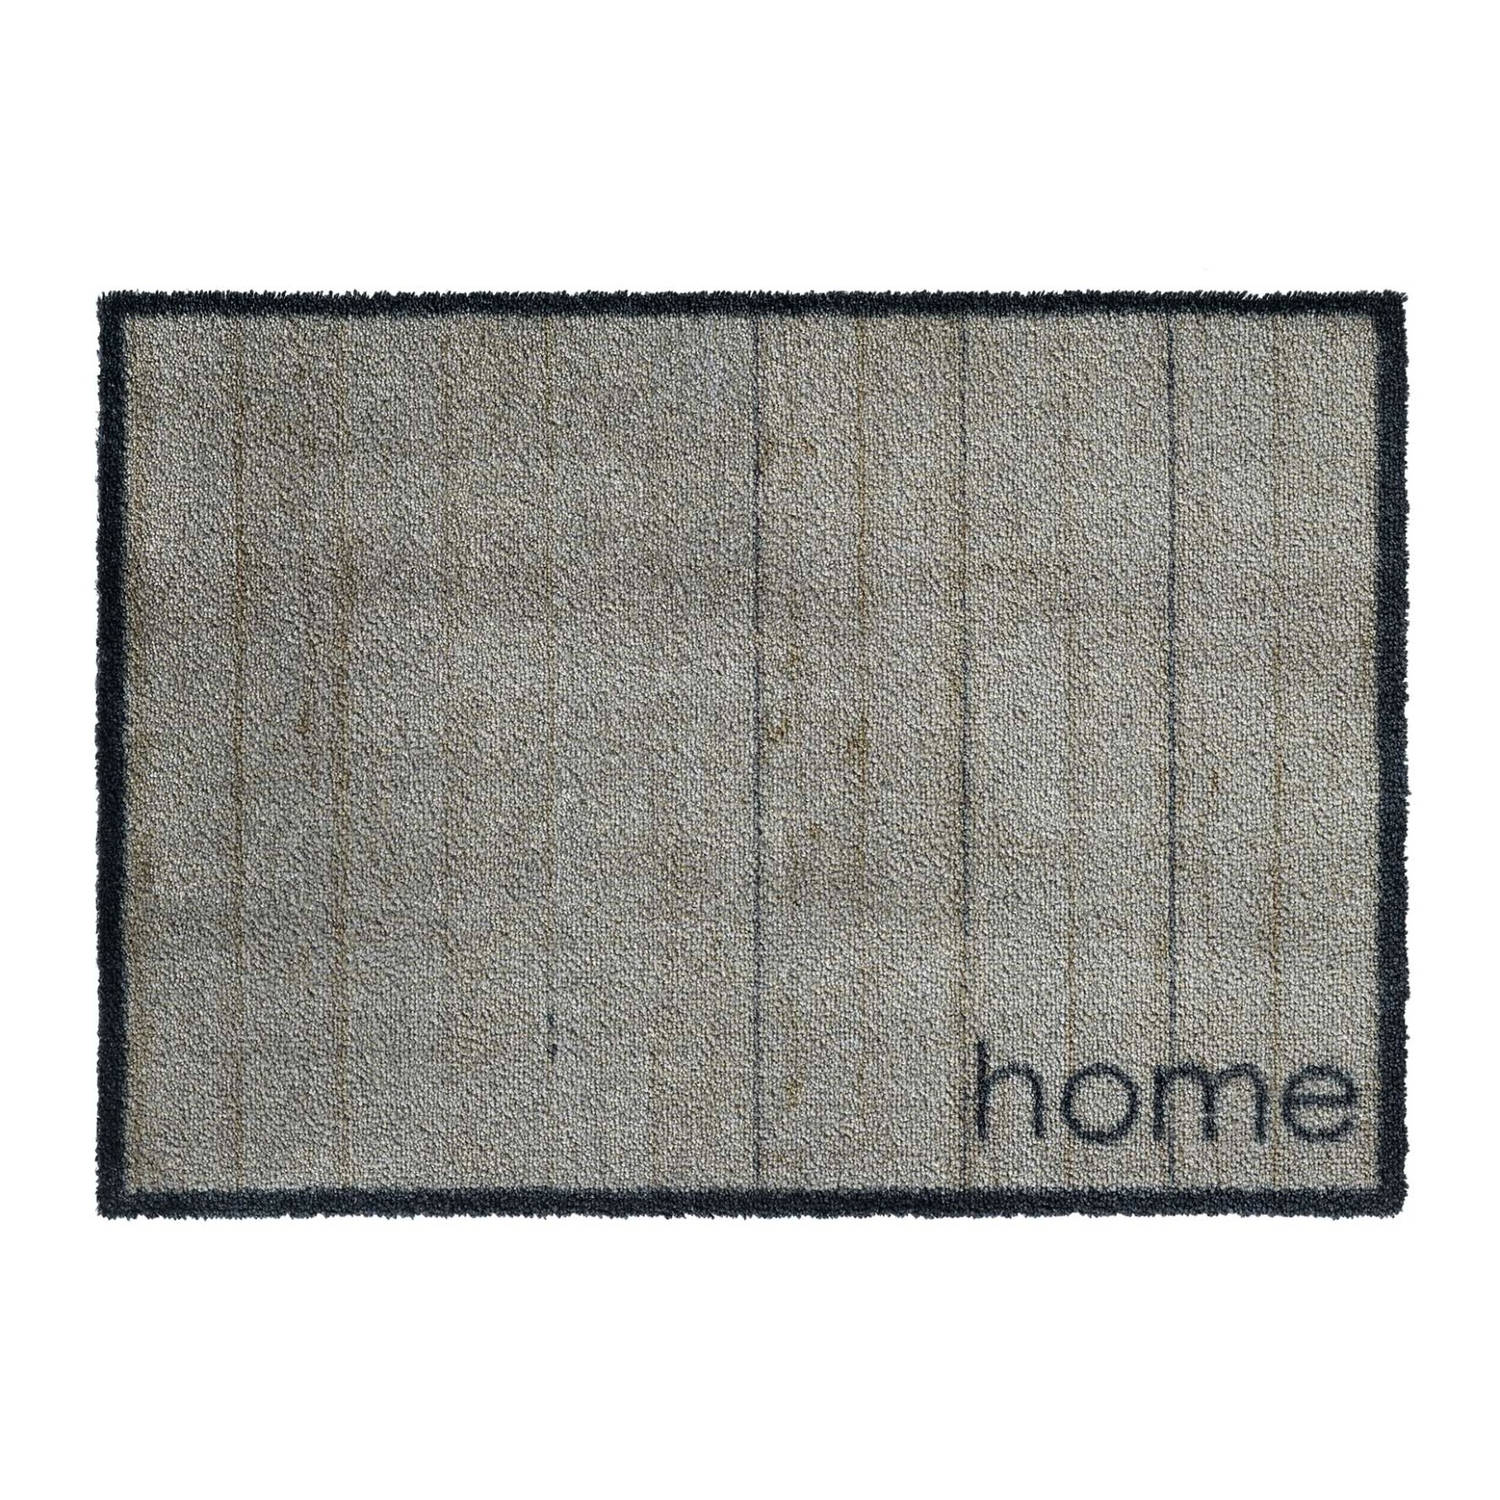 Mat Rustic Home taupe 50x70 cm